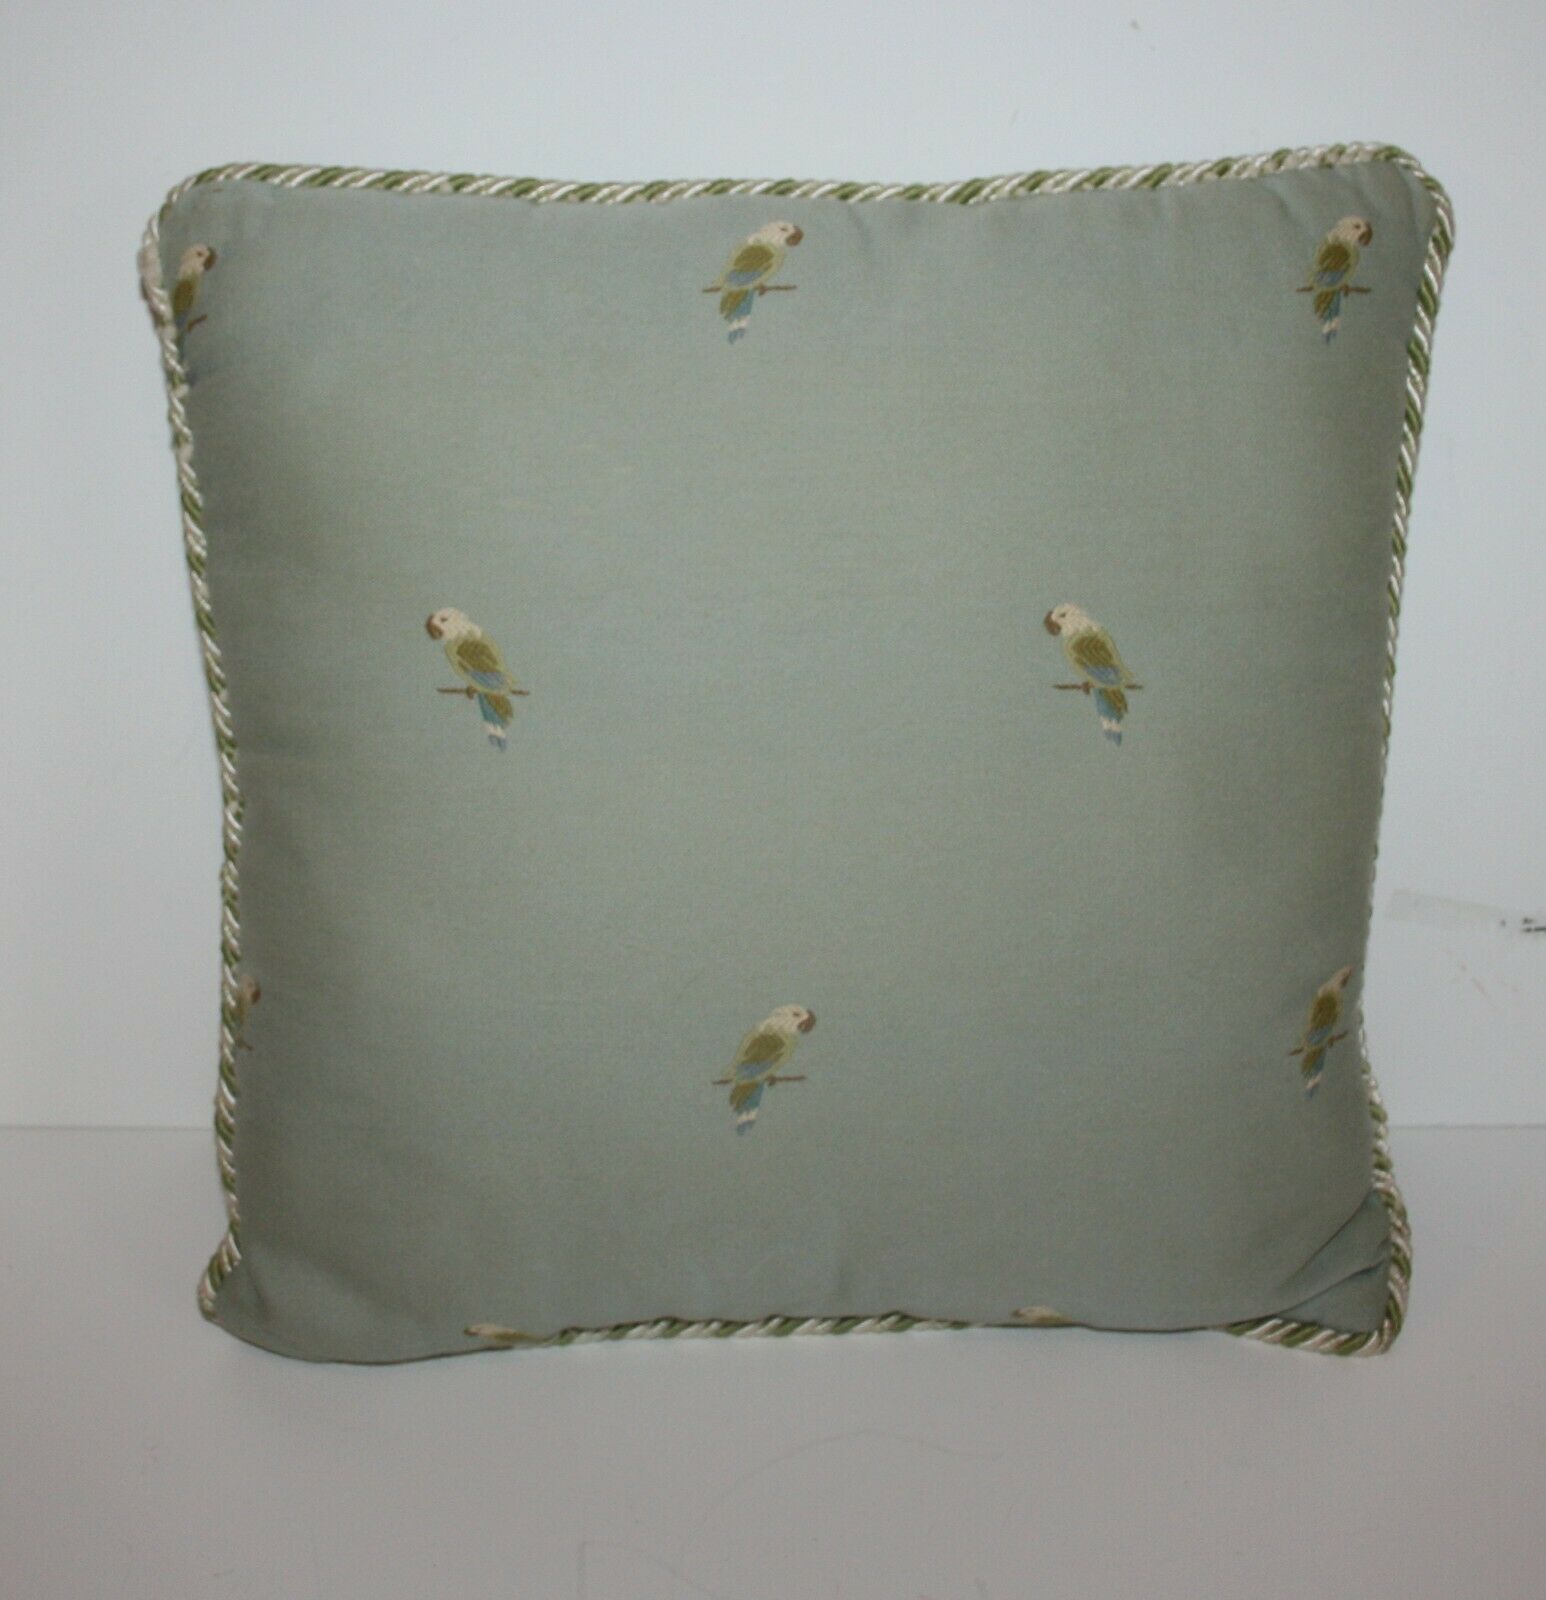 Embroidered Parrots Accent Throw Pillow 16x16